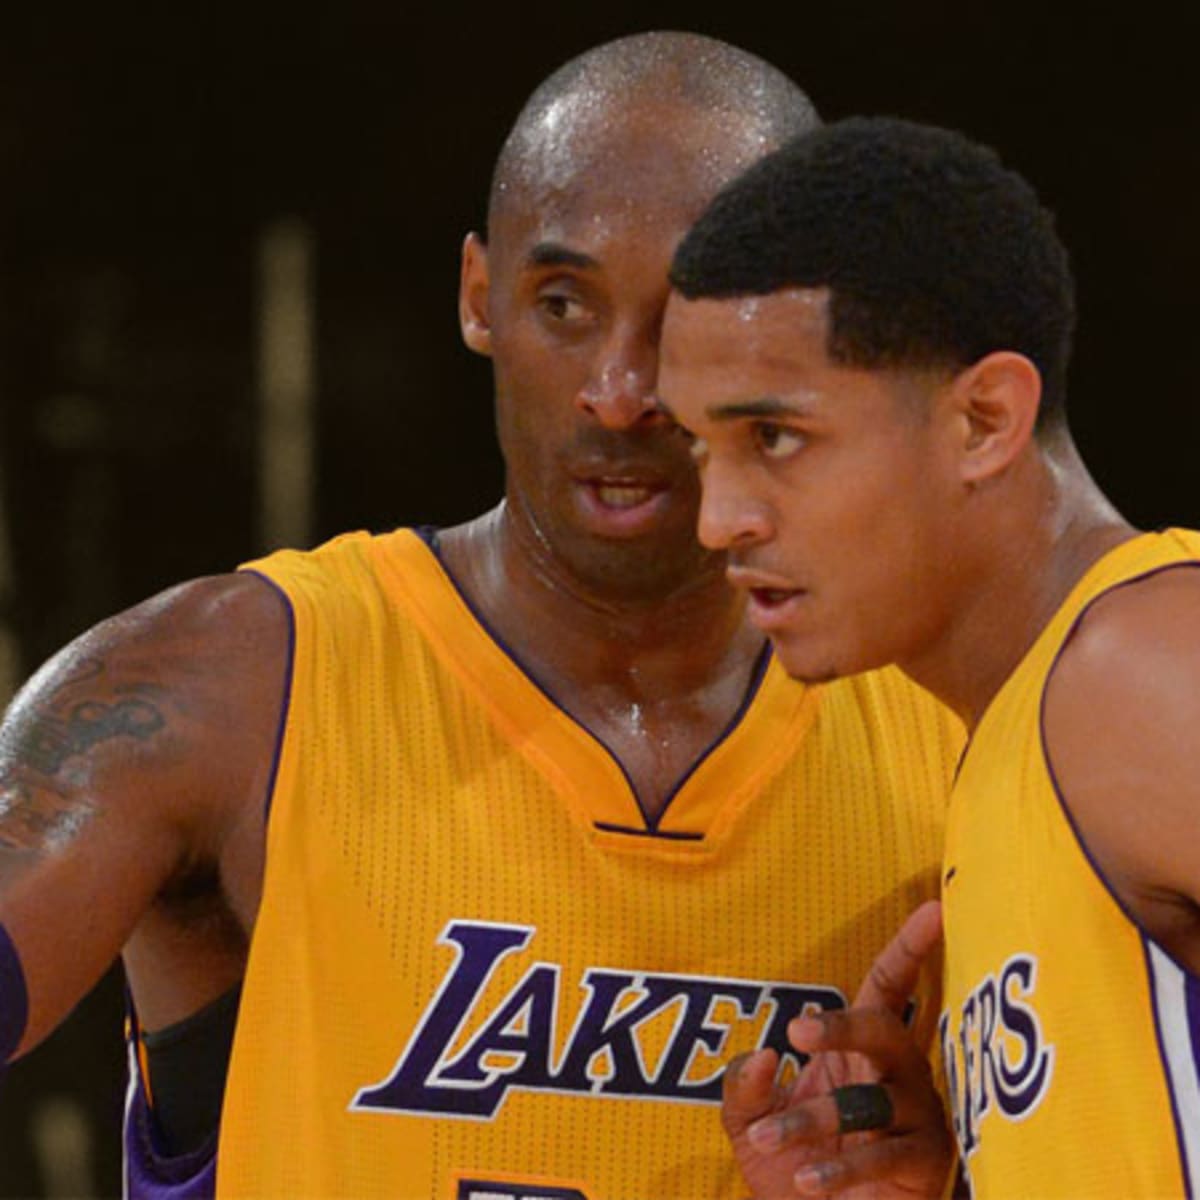 The Lakers' Jordan Clarkson on Giving Back and Playing with Kobe